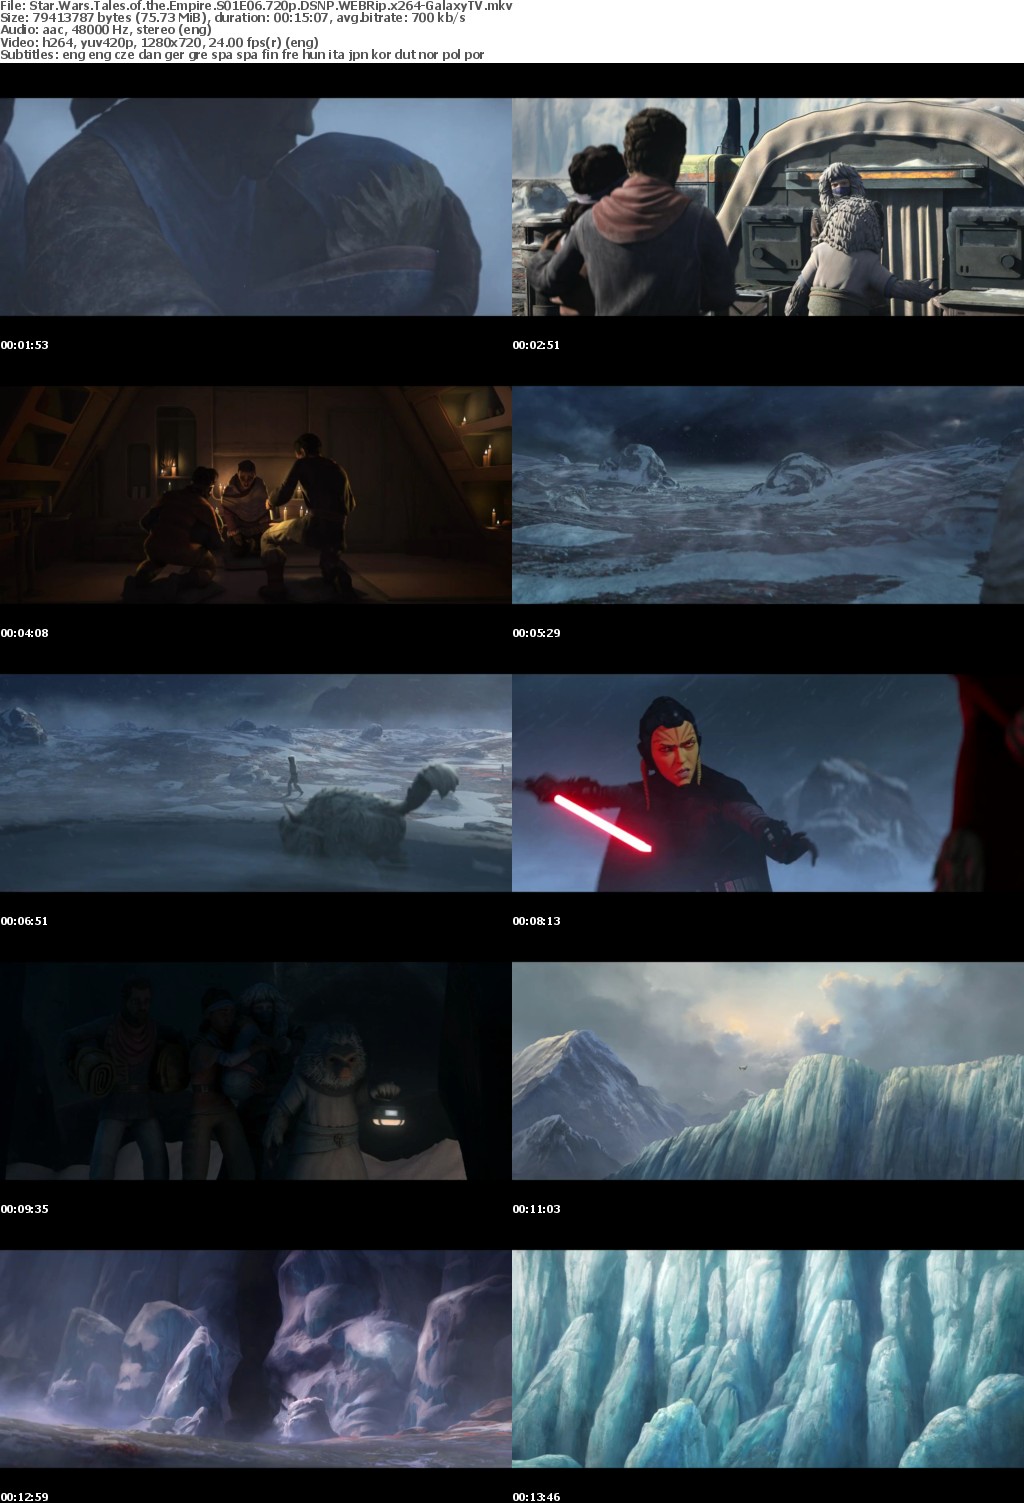 Star Wars Tales of the Empire S01 COMPLETE 720p DSNP WEBRip x264-GalaxyTV